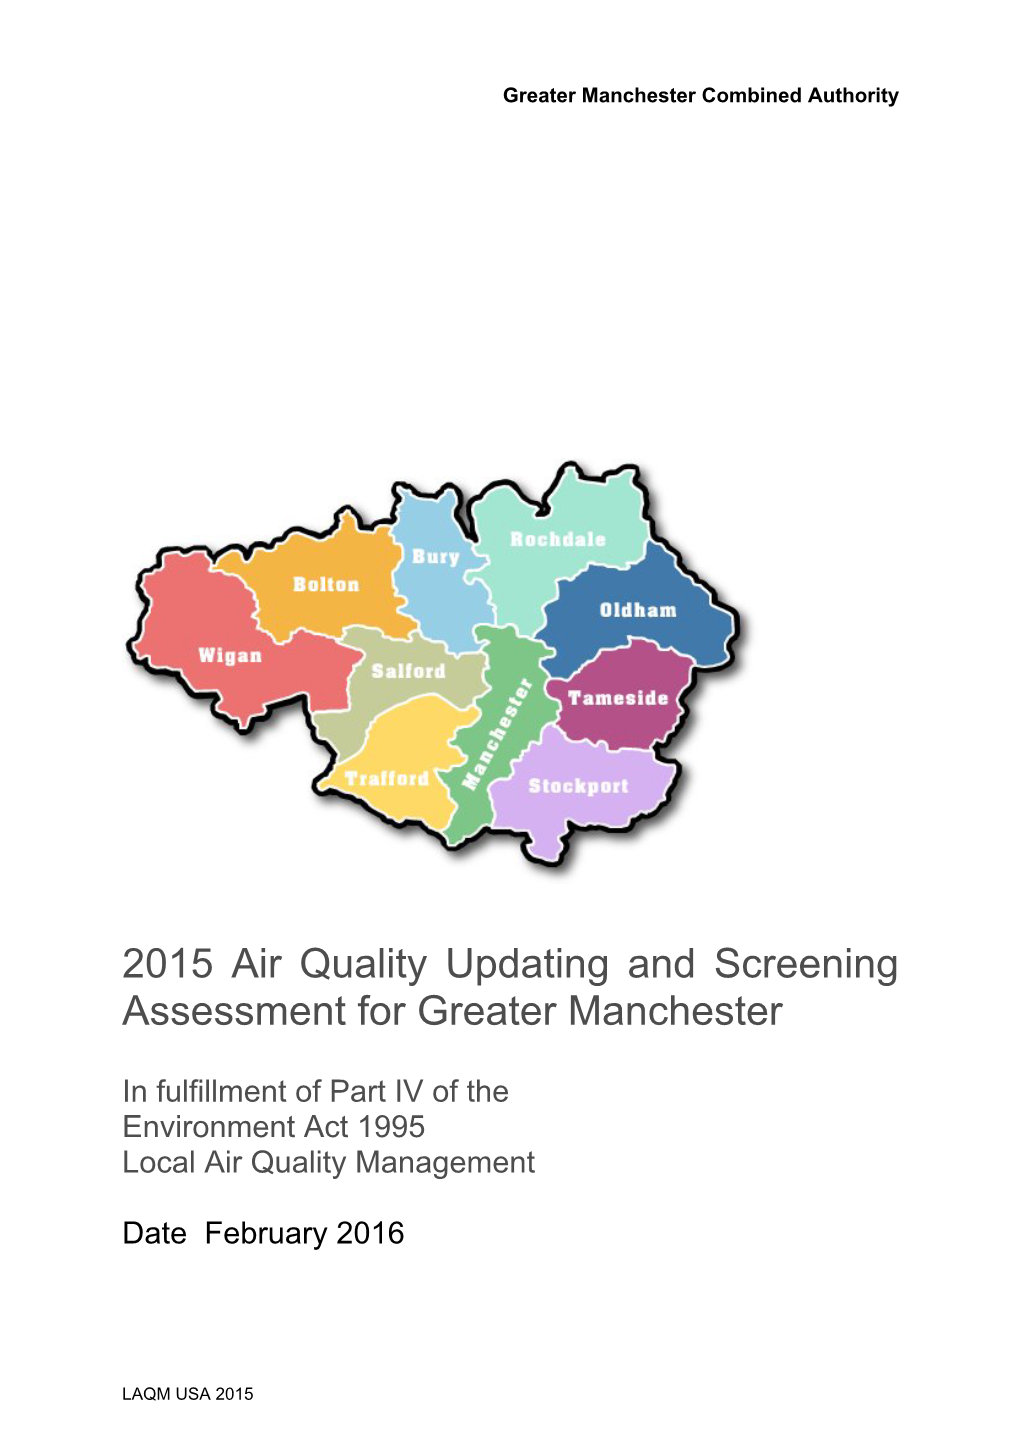 2015 Air Quality Updating and Screening Assessment for Greater Manchester